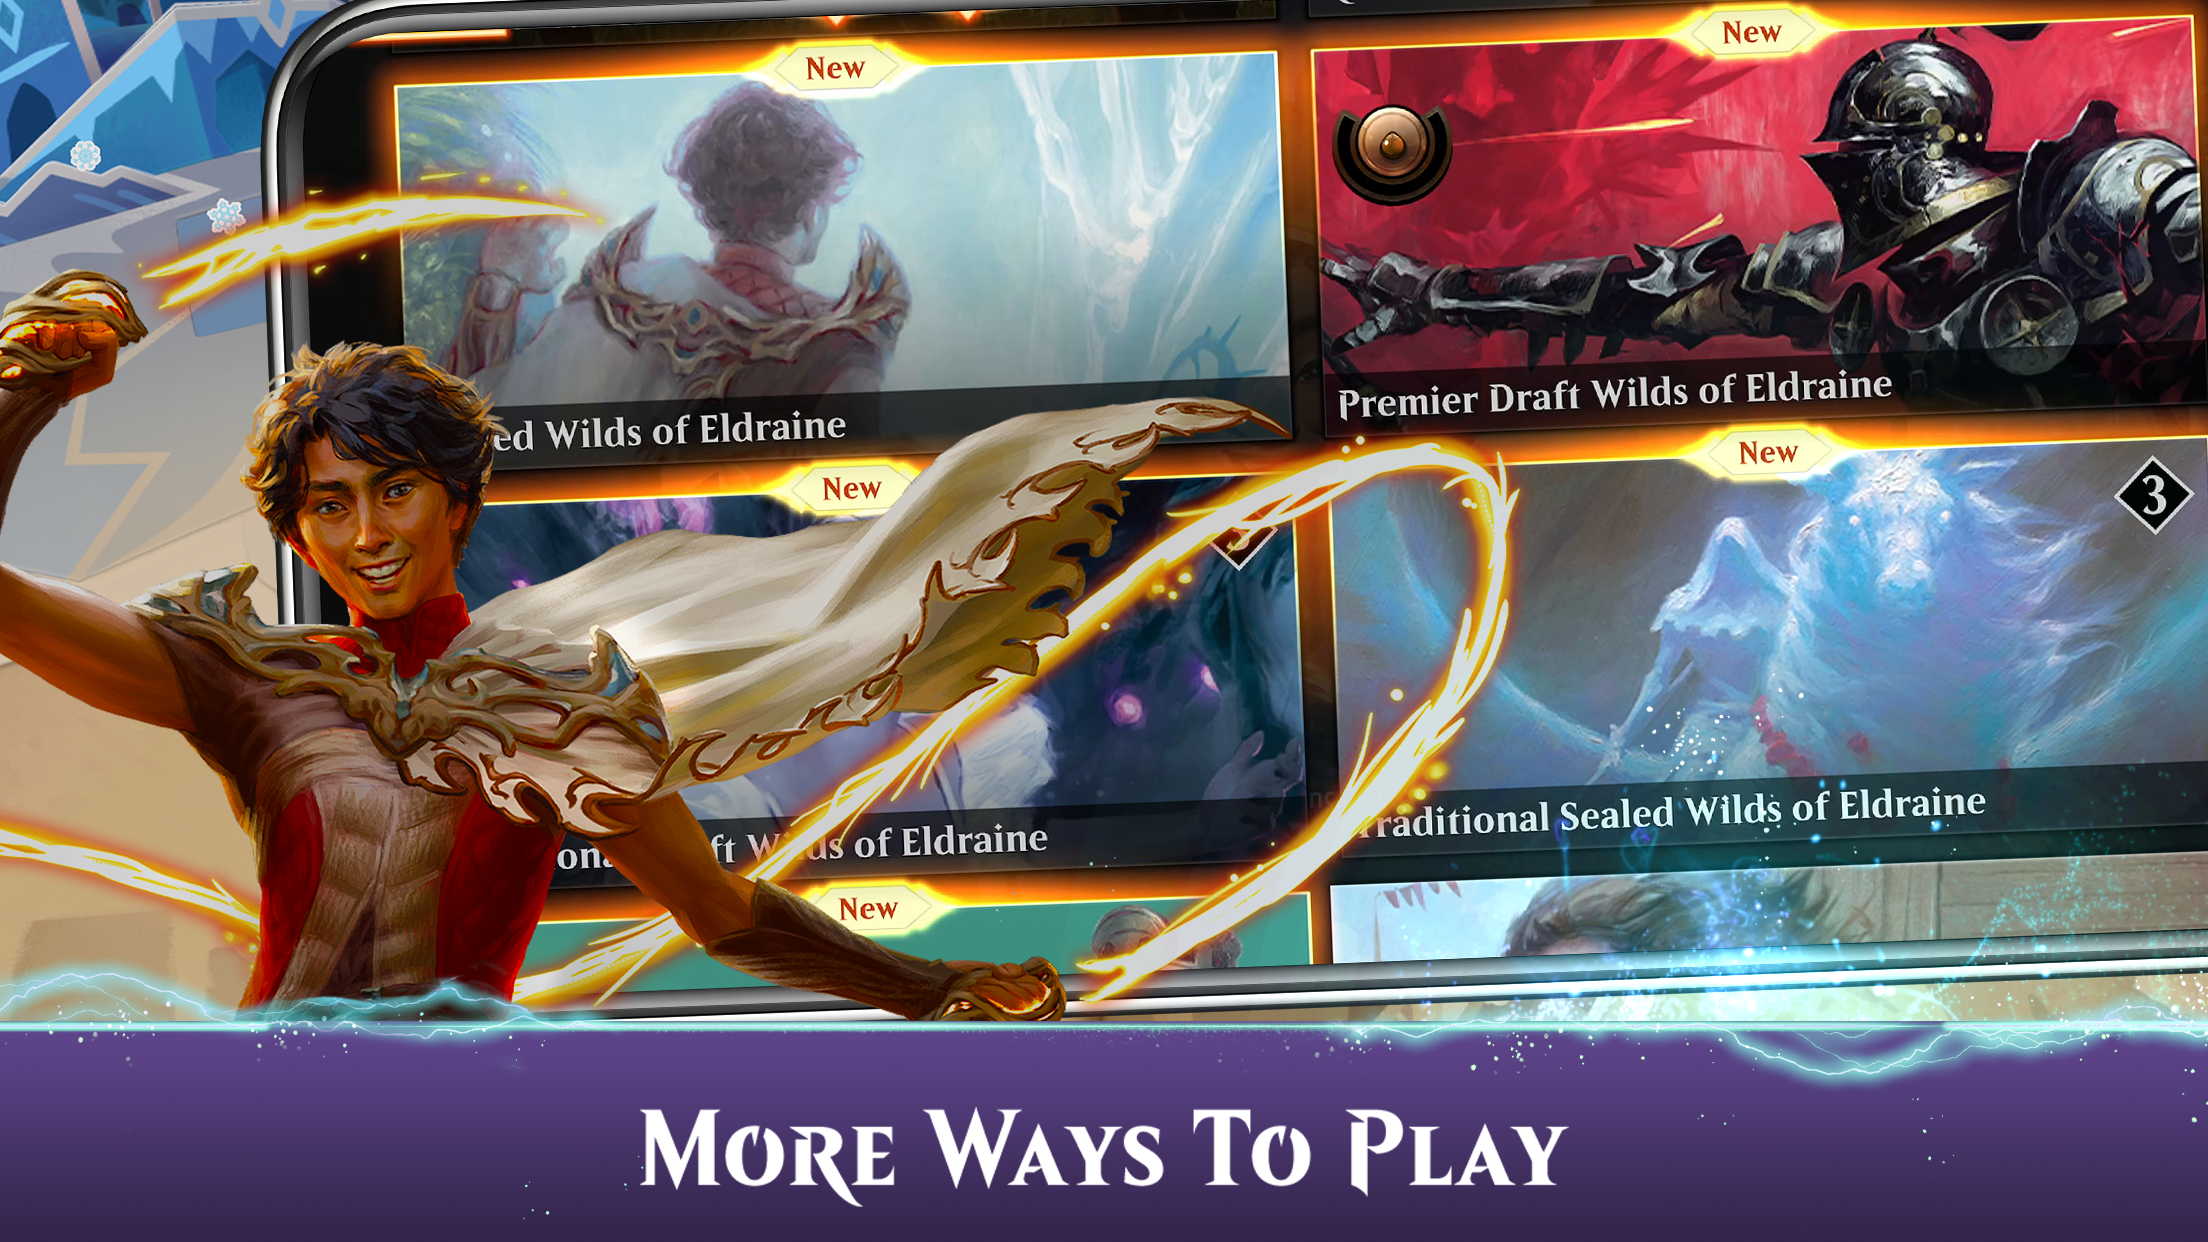 Play Magic: The Gathering Arena Online for Free on PC & Mobile